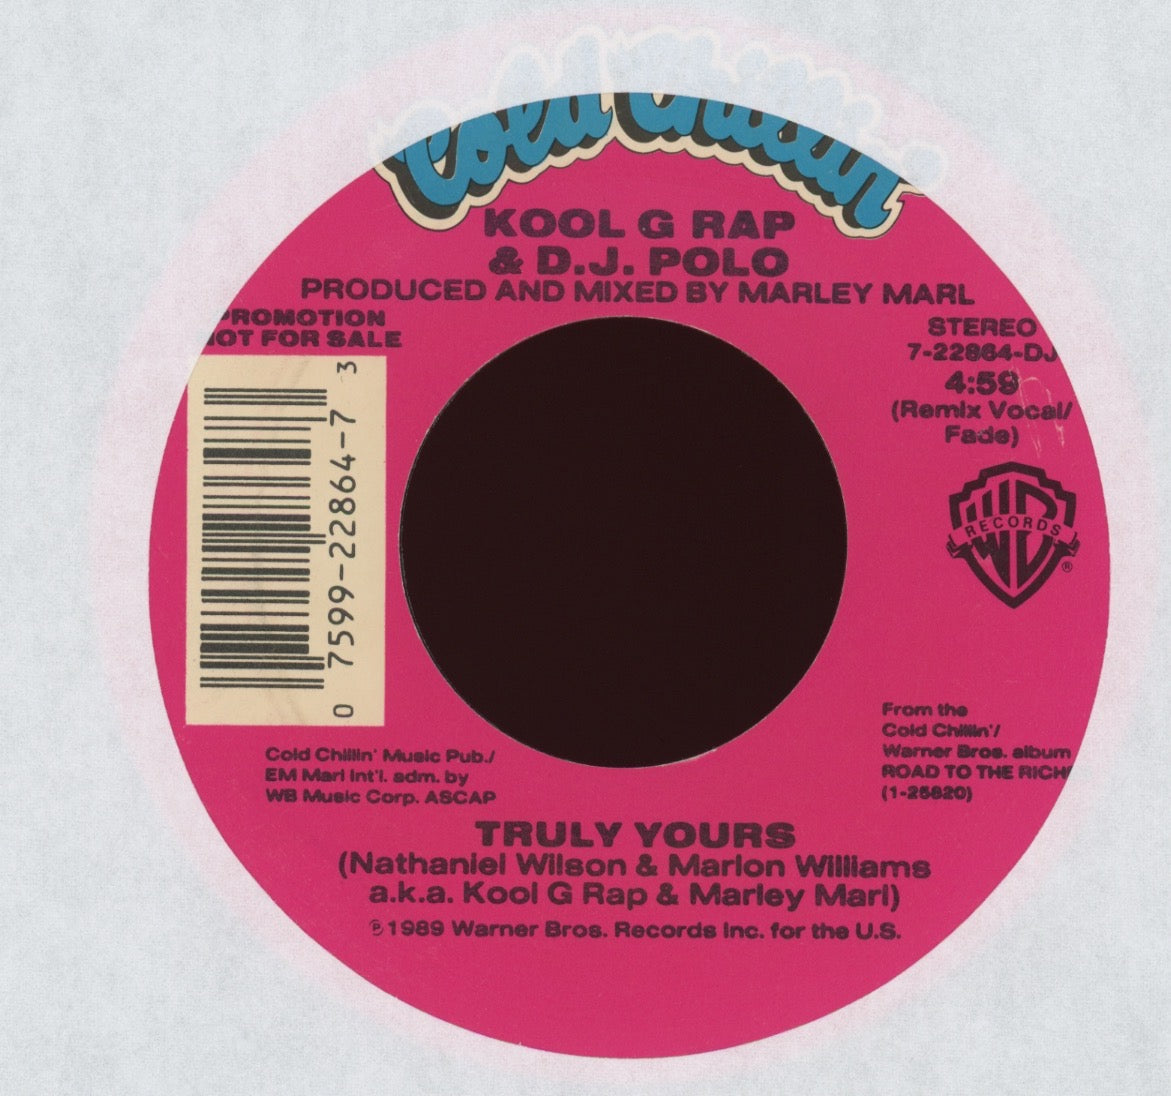 Kool G Rap & D.J. Polo - Truly Yours on Cold Chillin' Promo Rap 45